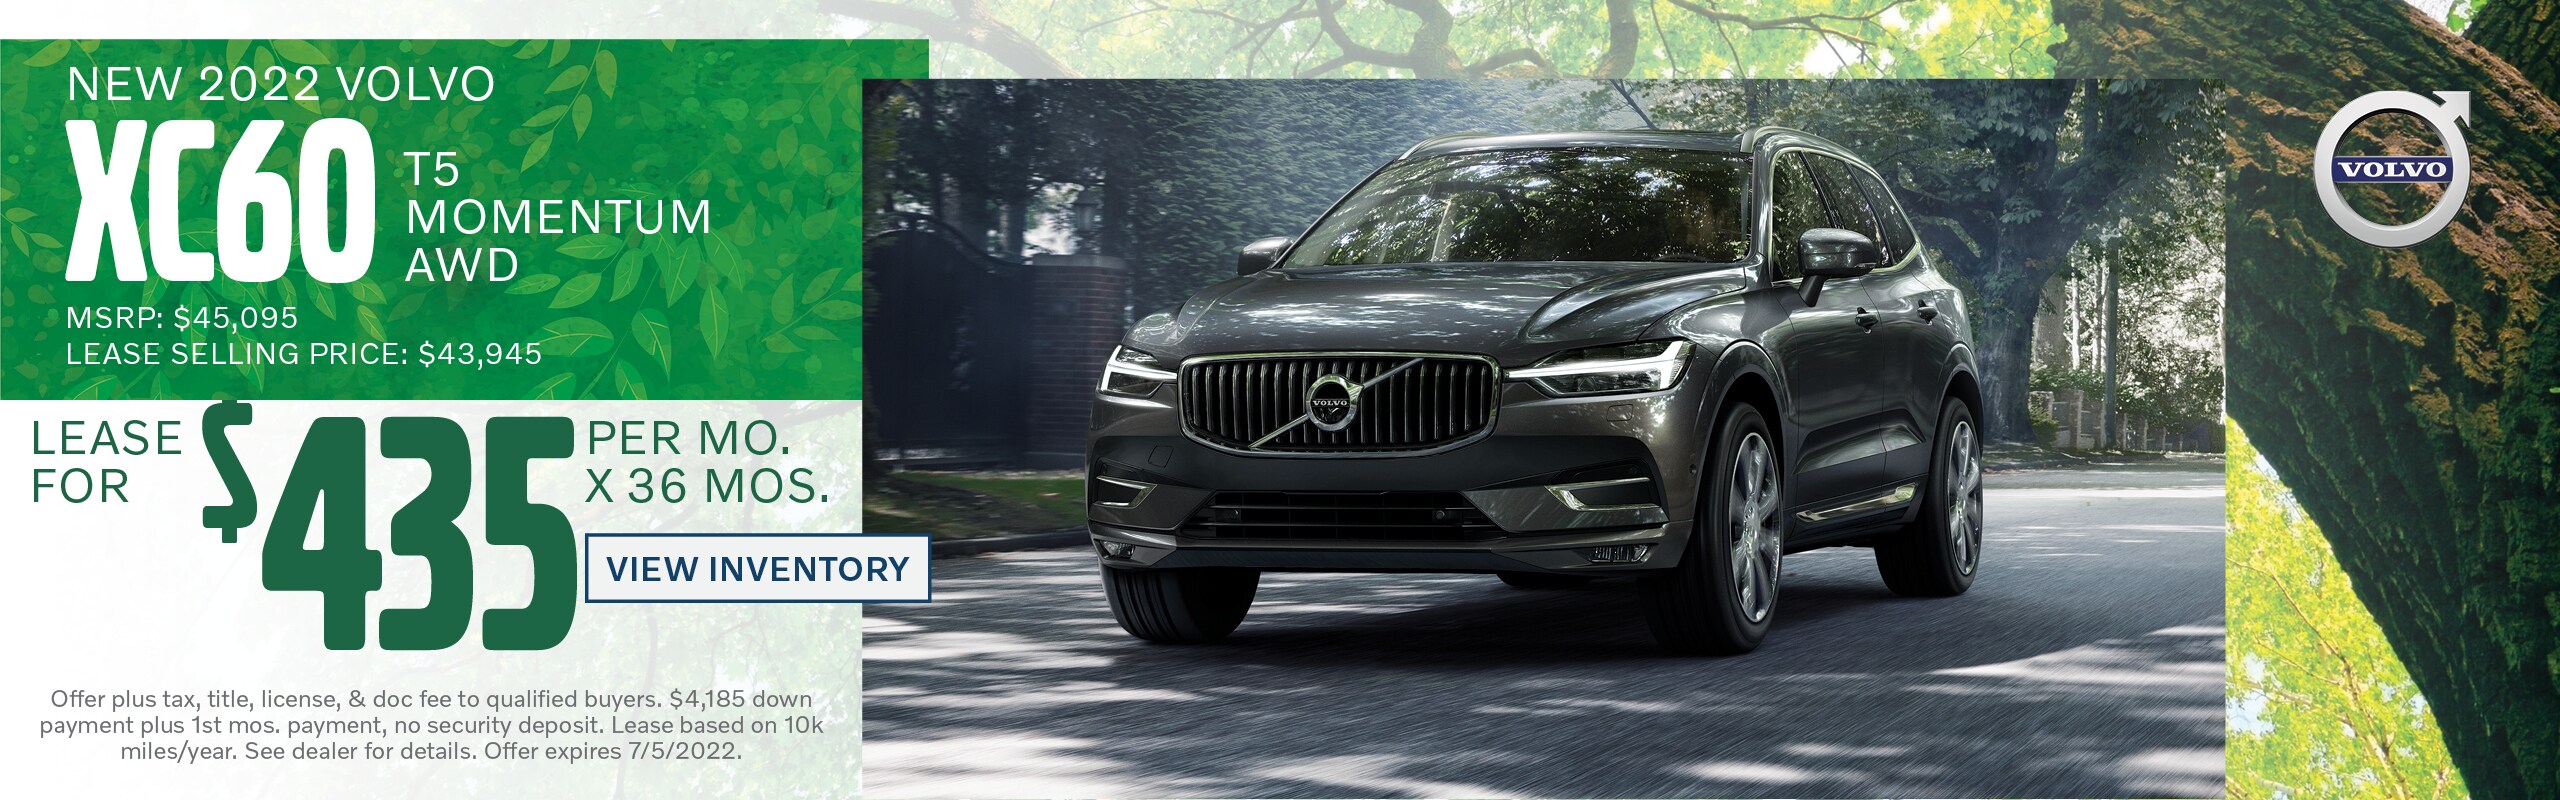 2022 Volvo XC60 T5 Momentum AWD lease for $435 per month for 36 months - Lease selling price: $43,945 and MSRP $45,095